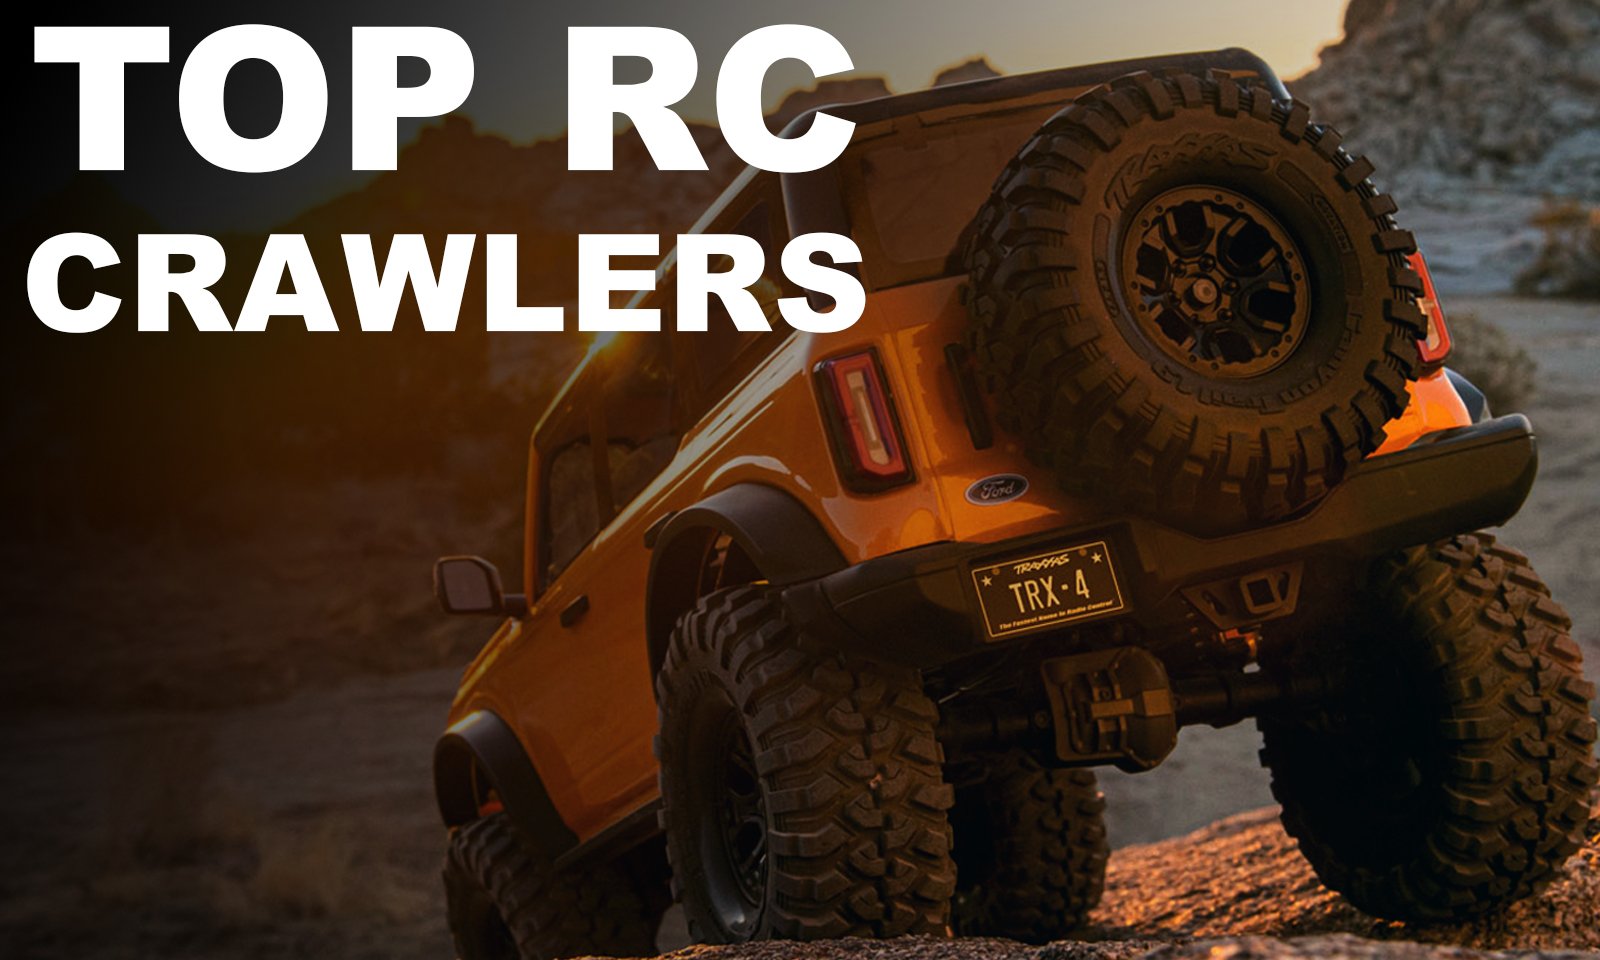 What are the Top 10 RC Crawlers?